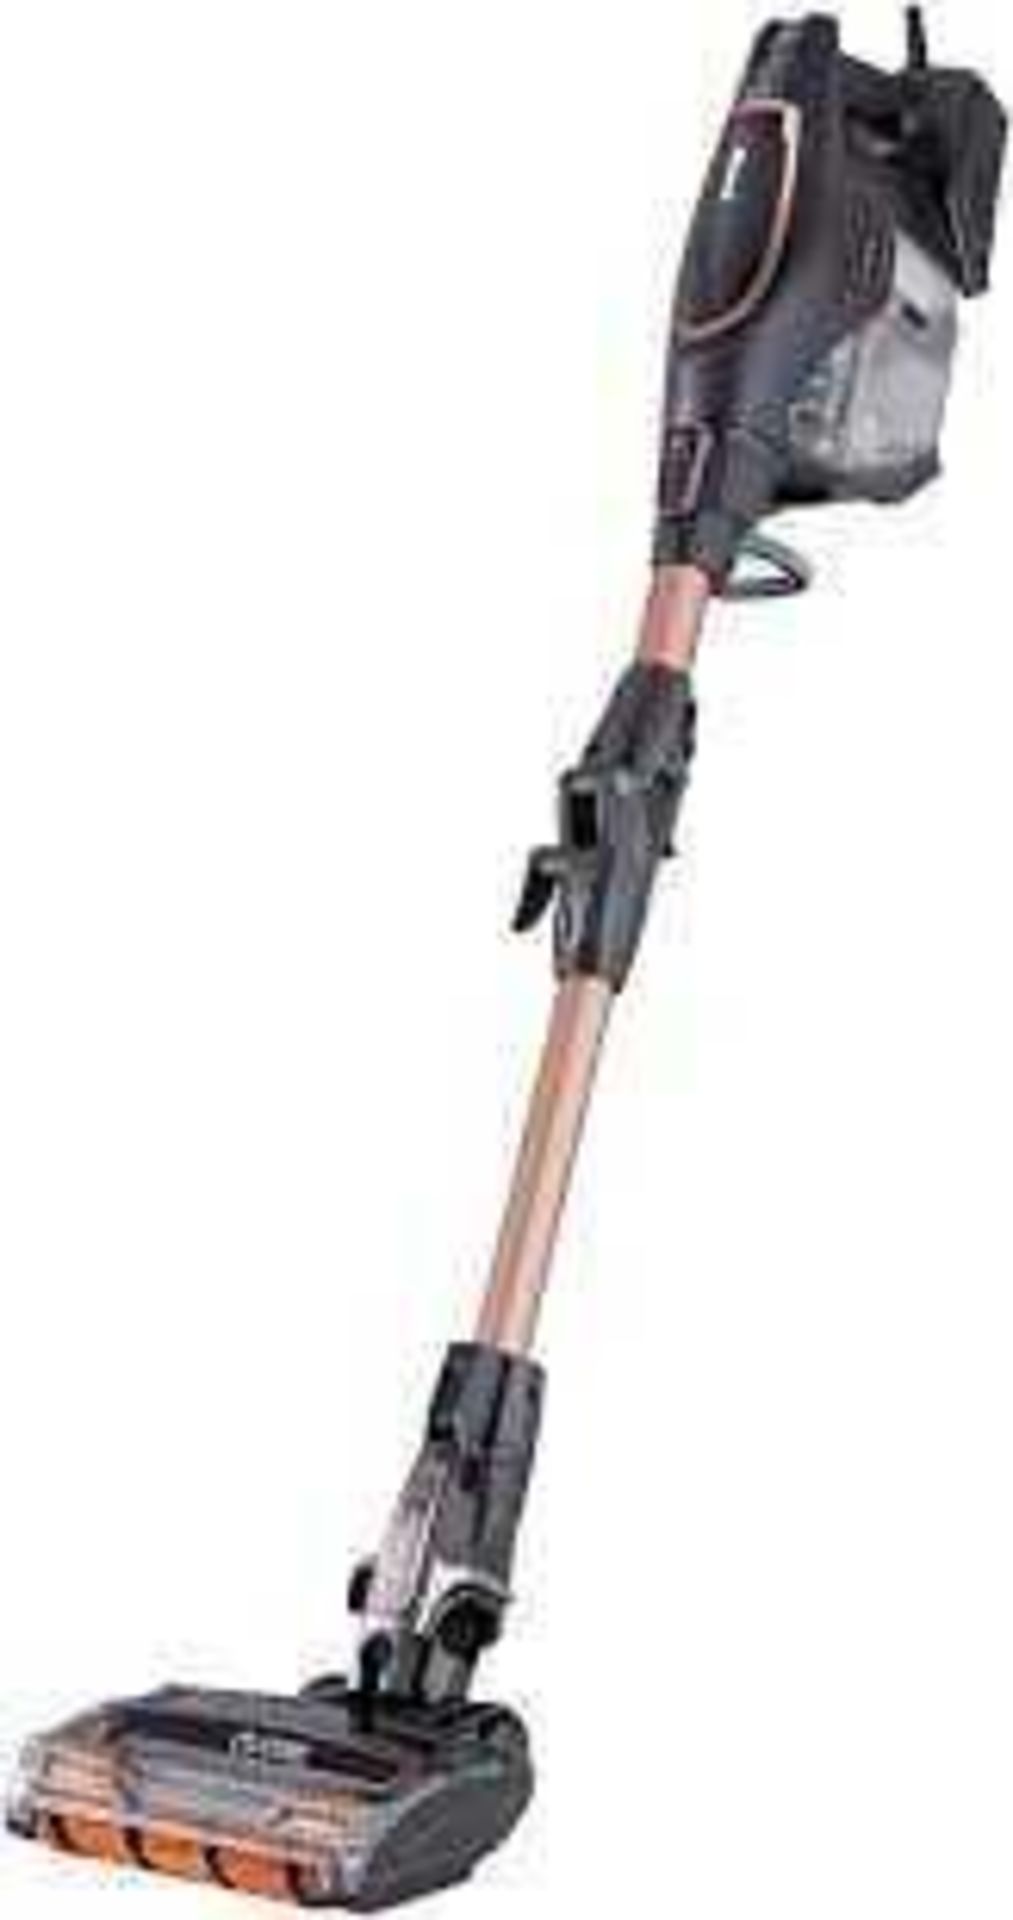 RRP £260 Boxed Shark Hz500Ukt Corded Stick Vacuum Cleaner With Anti Hair Wrap Technology